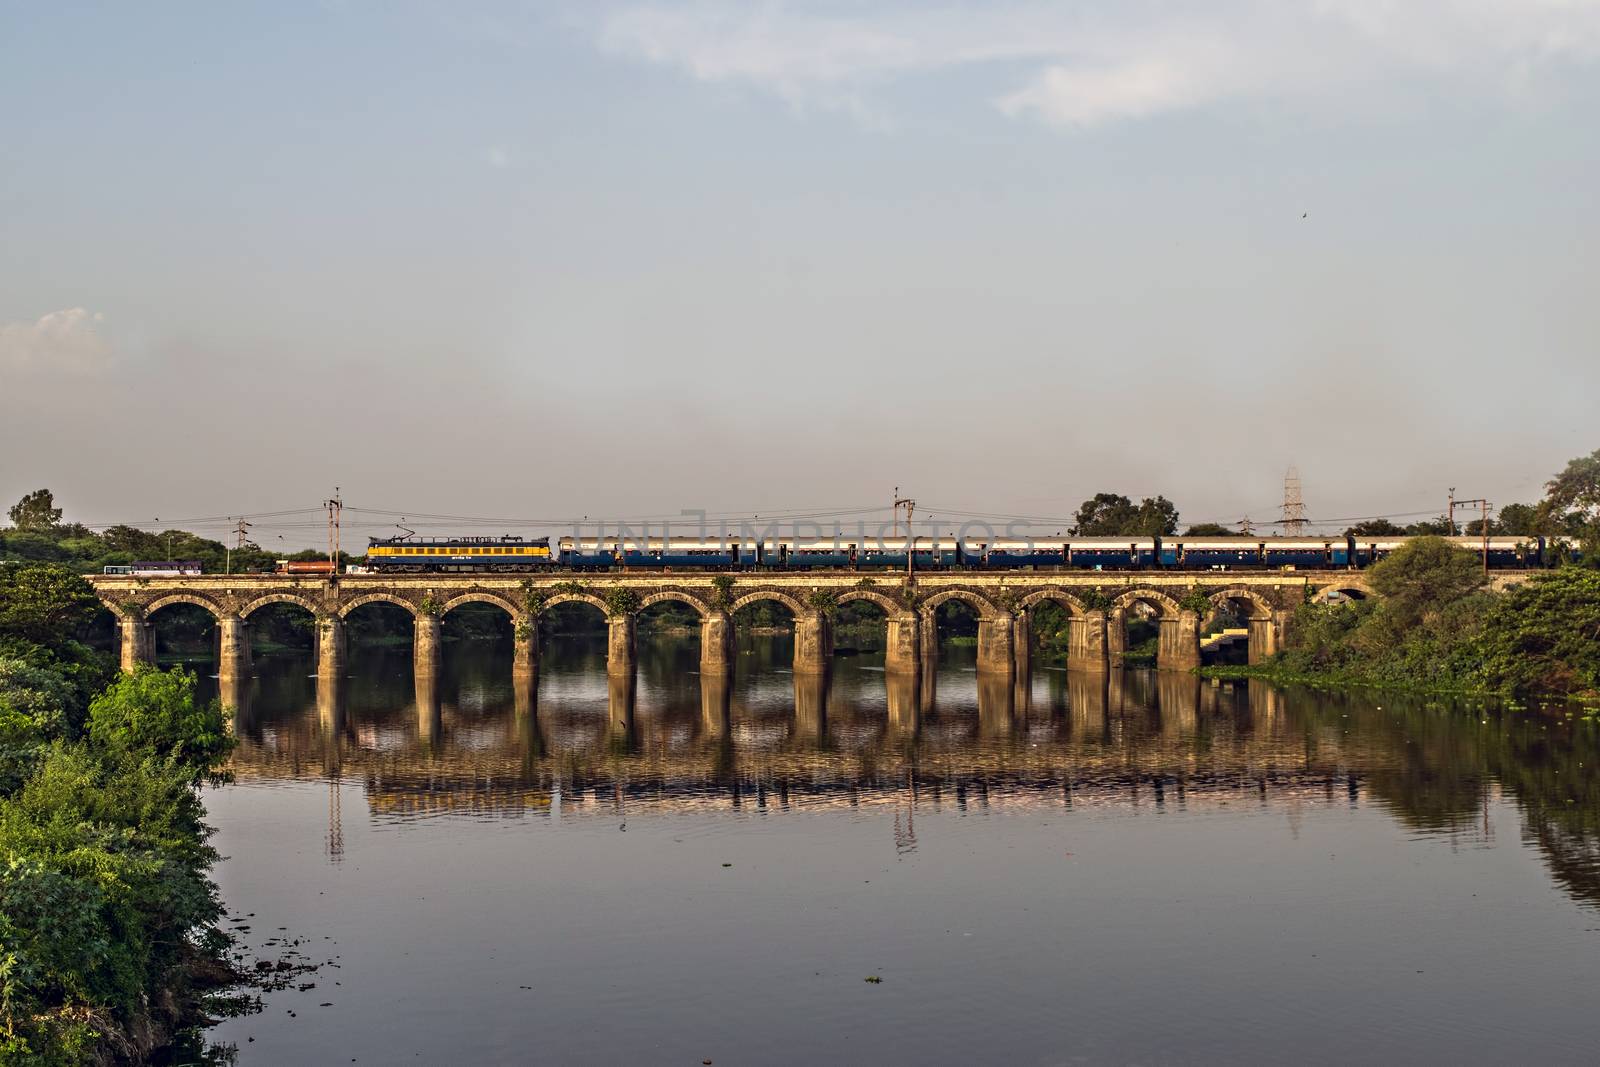 Pune to Mumbai super fast Intercity express train passing over Harris bridge in Dapodi, making a nice reflection in waters of Mula river. by lalam